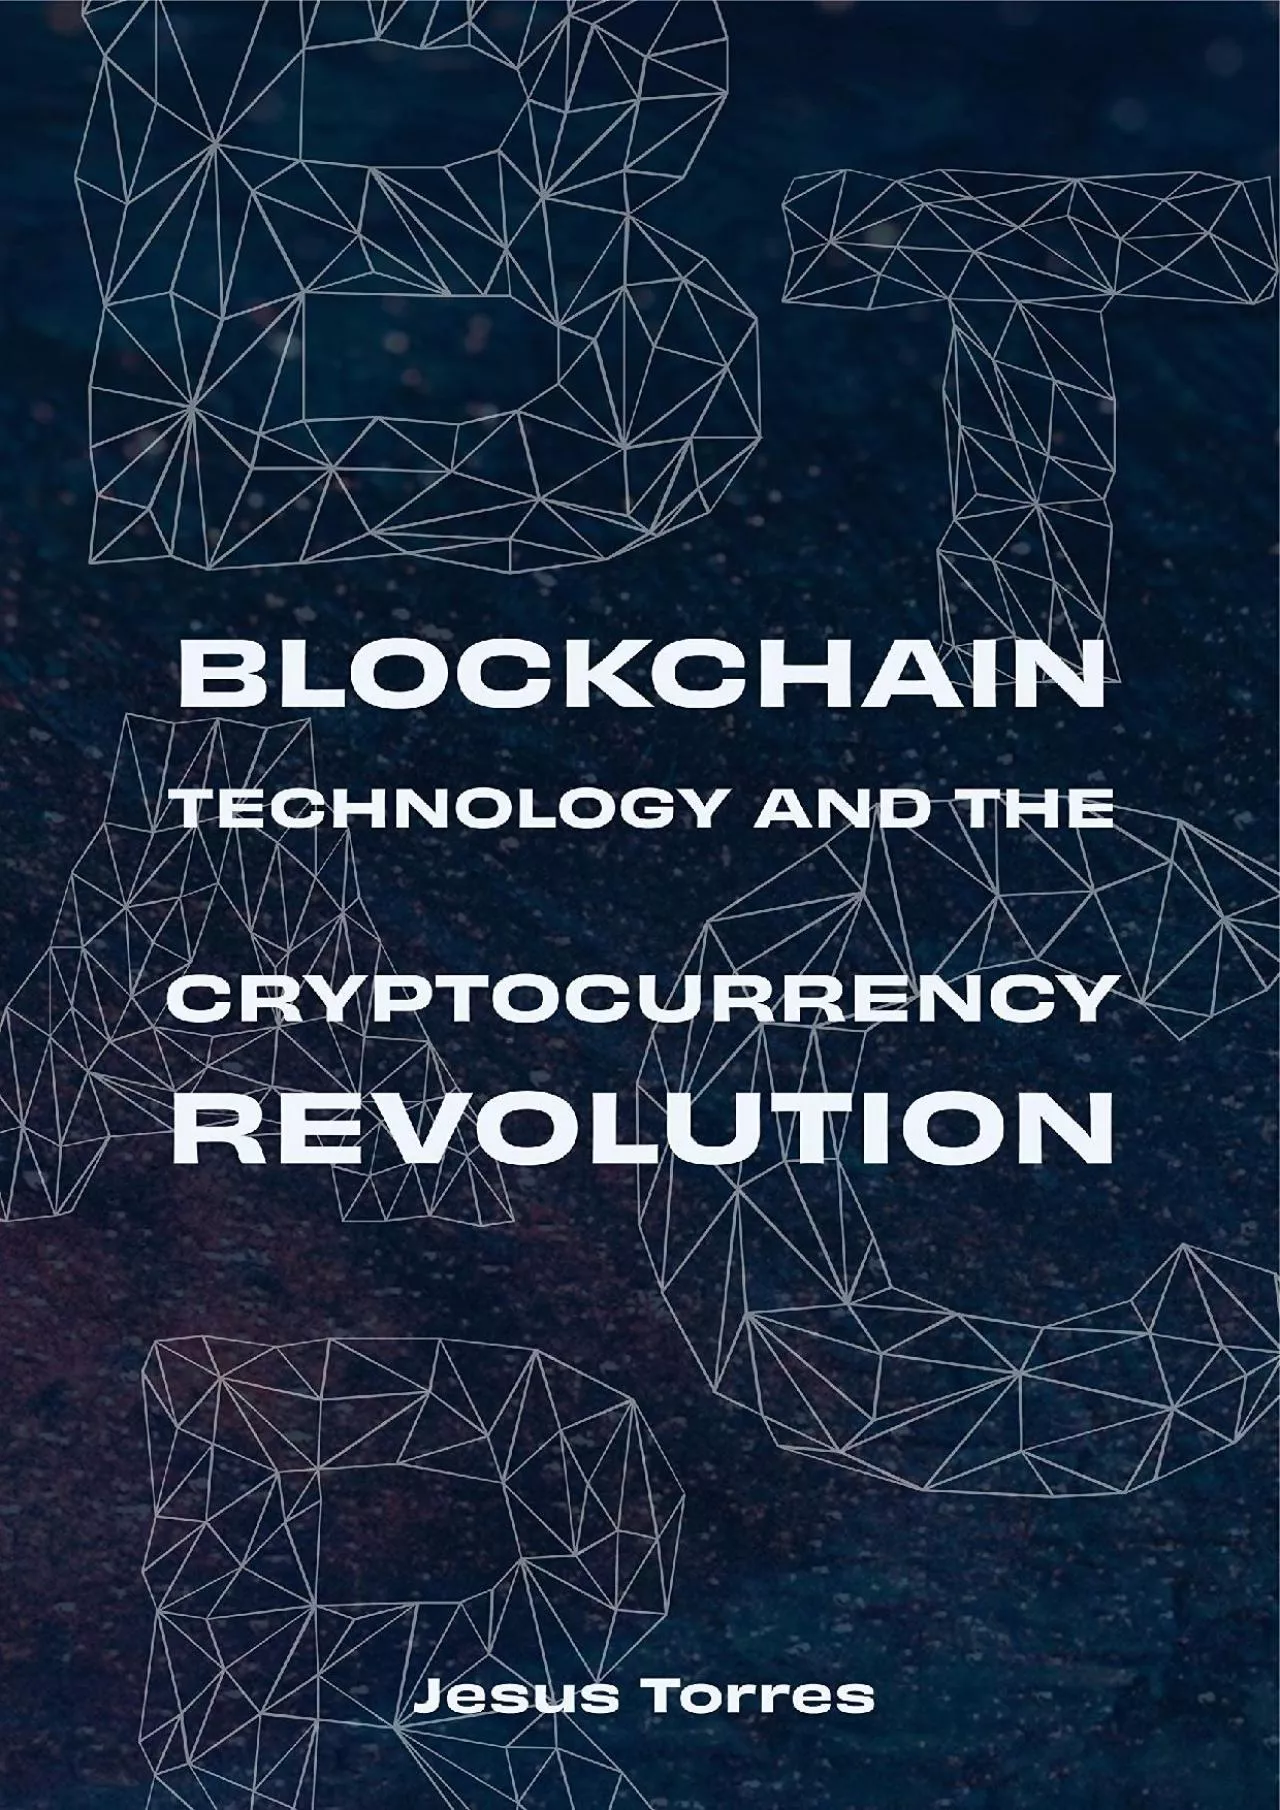 (BOOS)-Blockchain Technology and The Cryptocurrency Revolution: A Fundamental Understanding